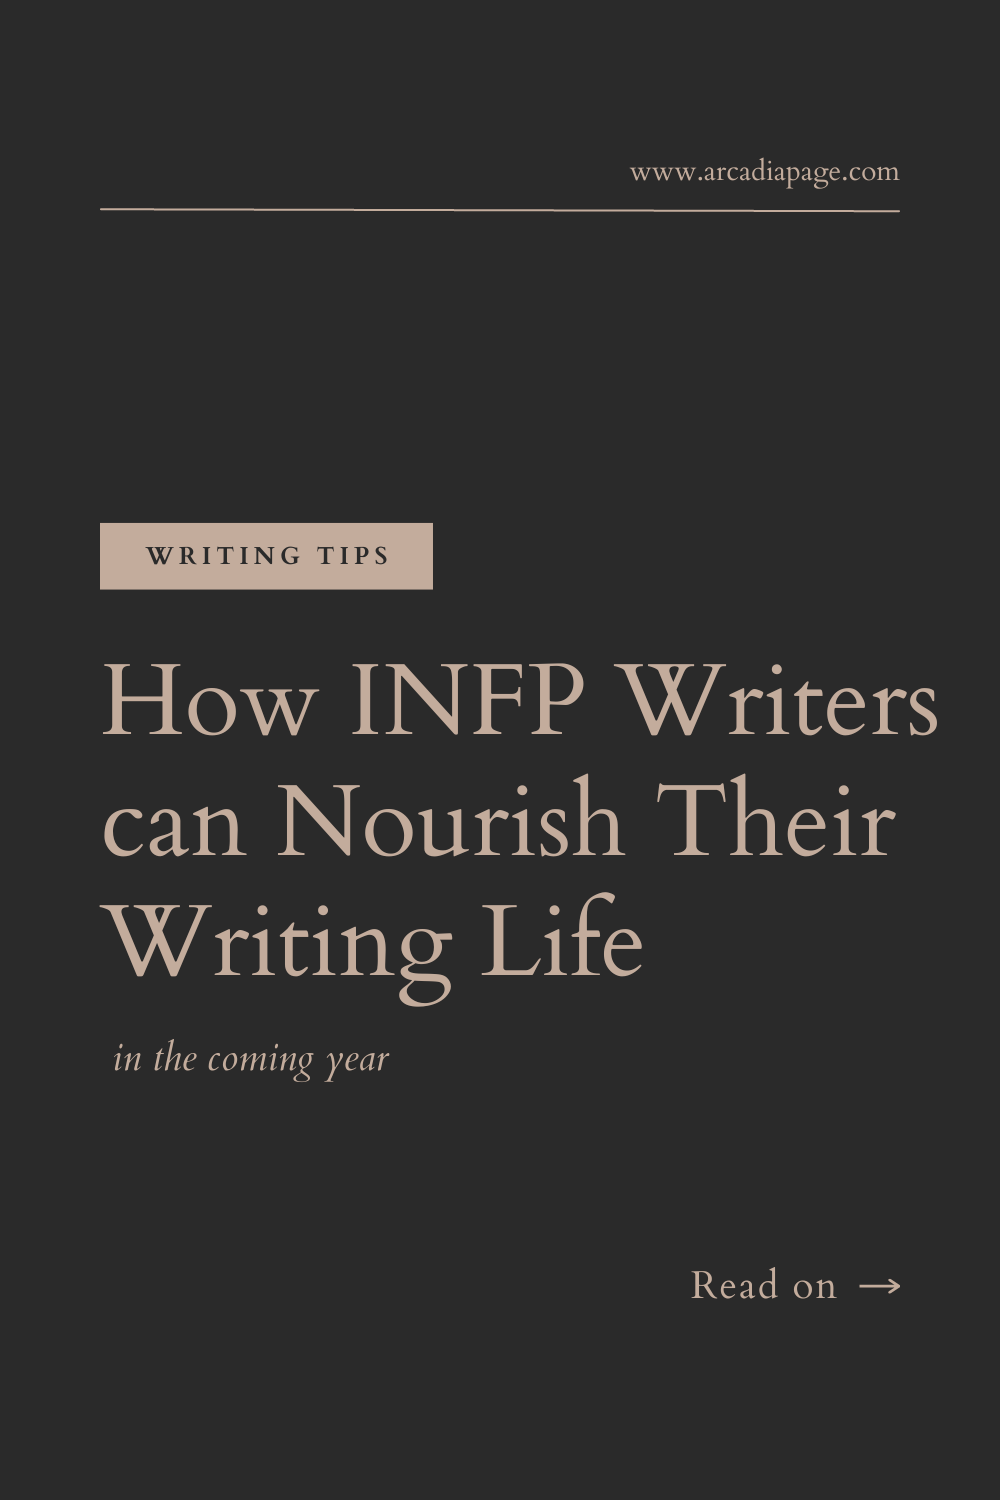 How INFP Writers can Nourish Their Writing Life